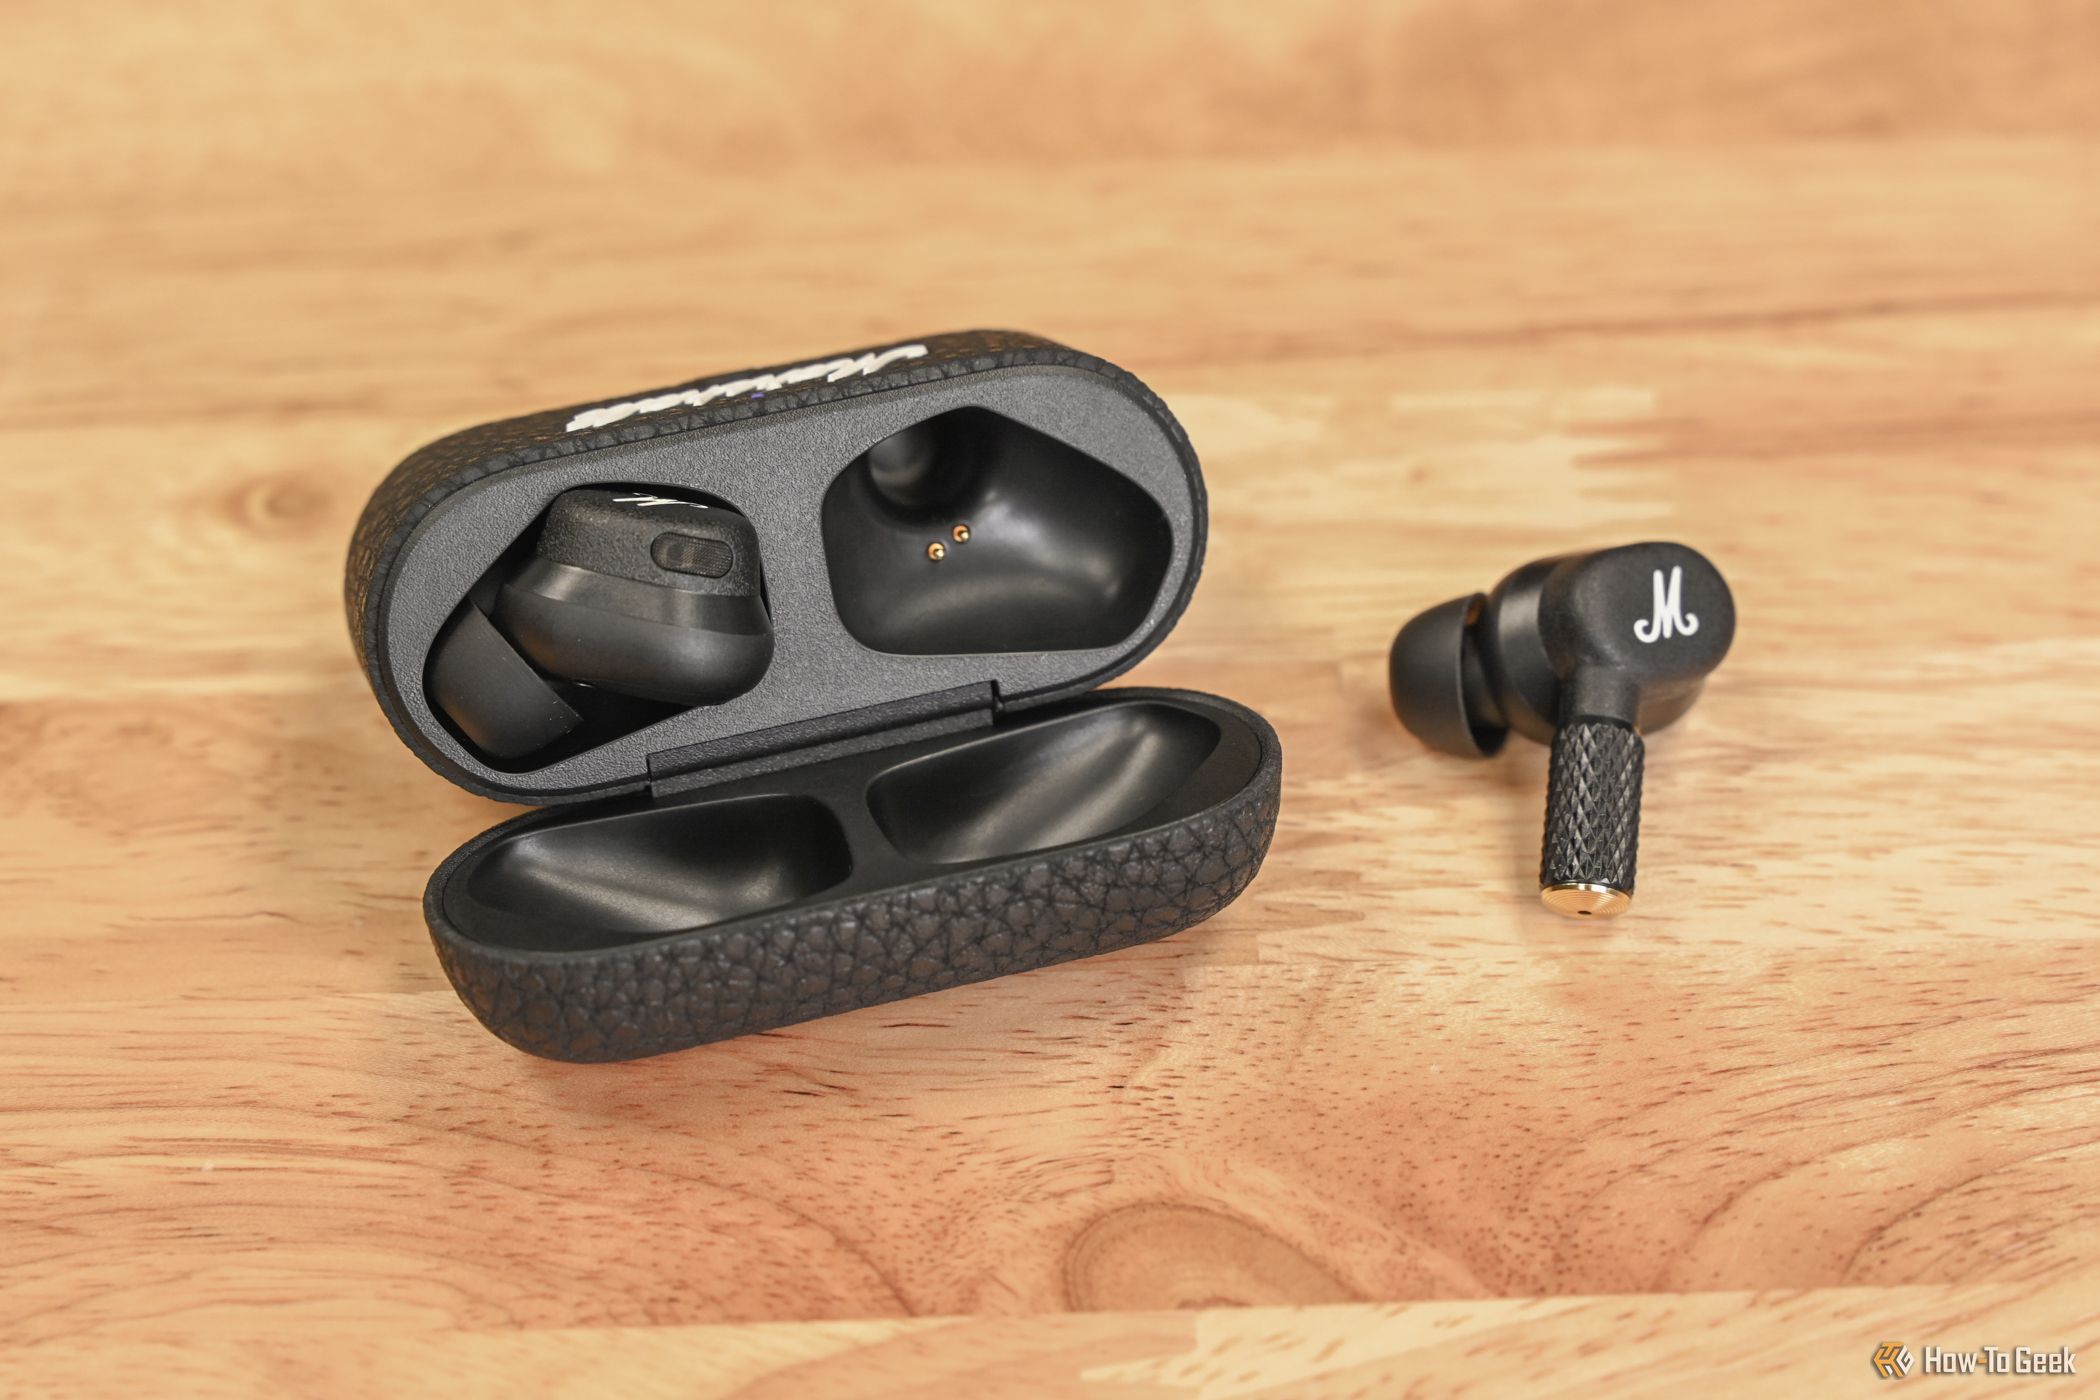 The Marshall Motif II ANC earbuds and case